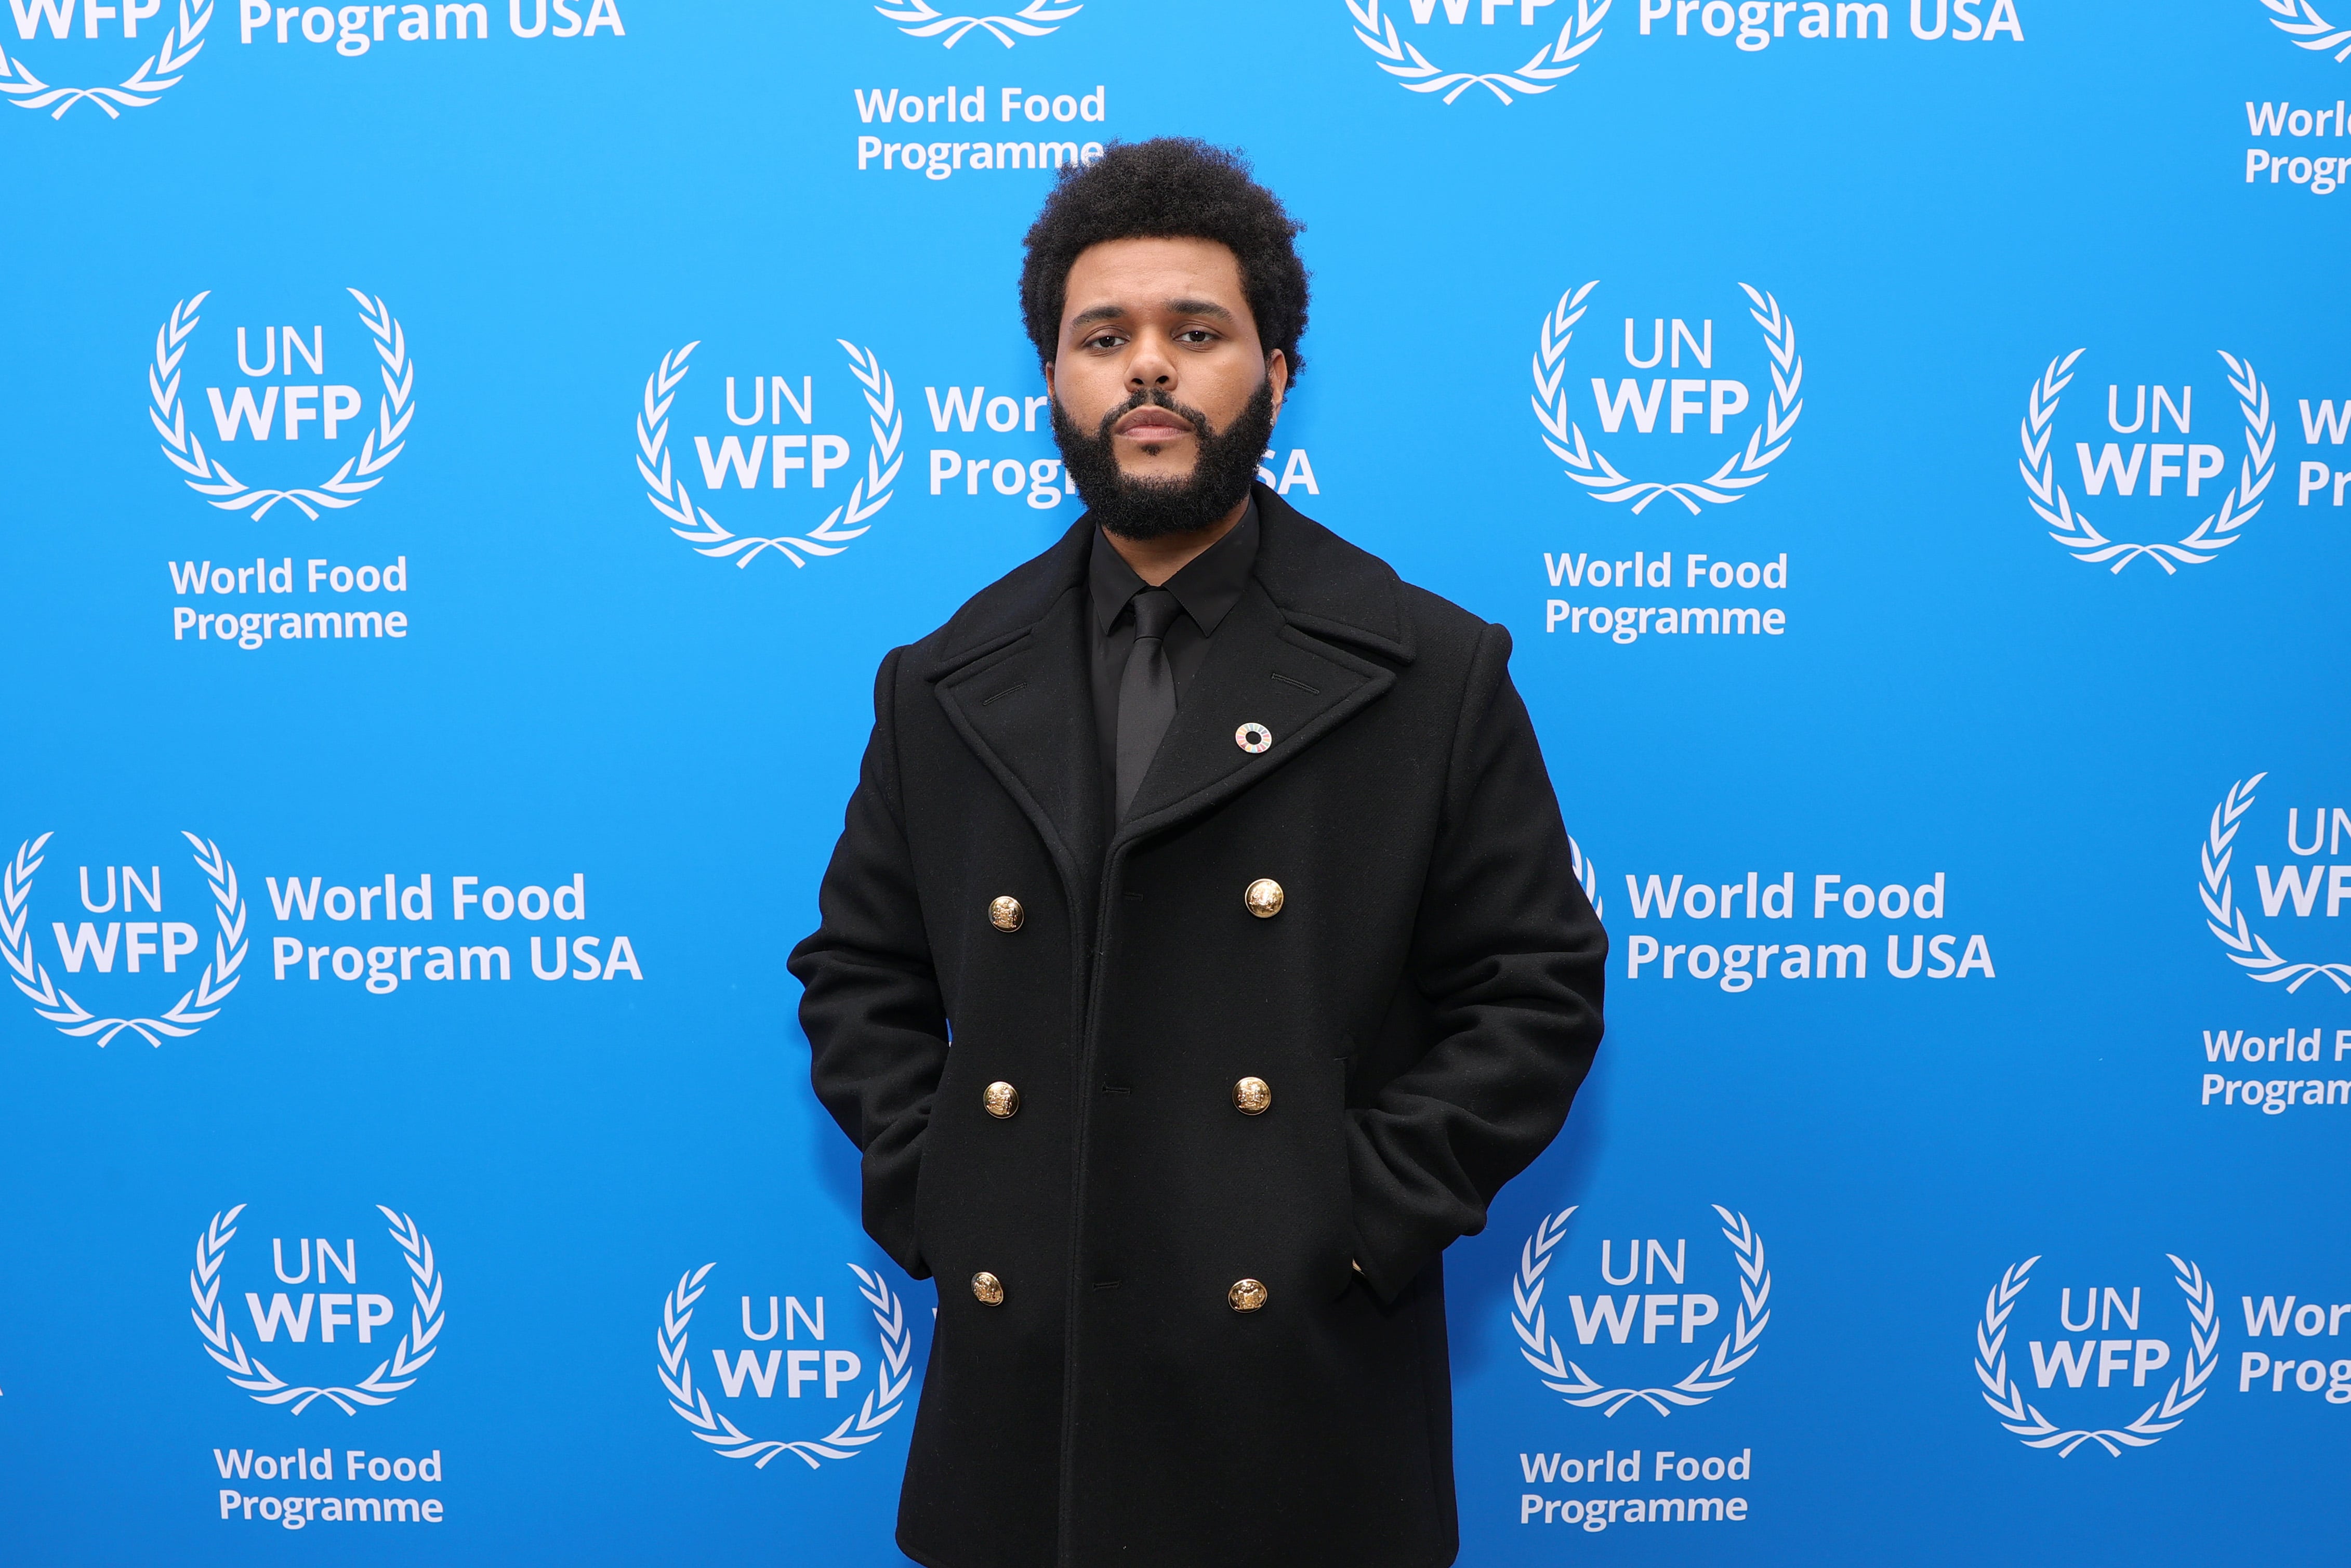 United Nations World Food Programme Goodwill Ambassador Abel "The Weeknd" Tesfaye to provide four million meals to support emergency humanitarian efforts in Gaza